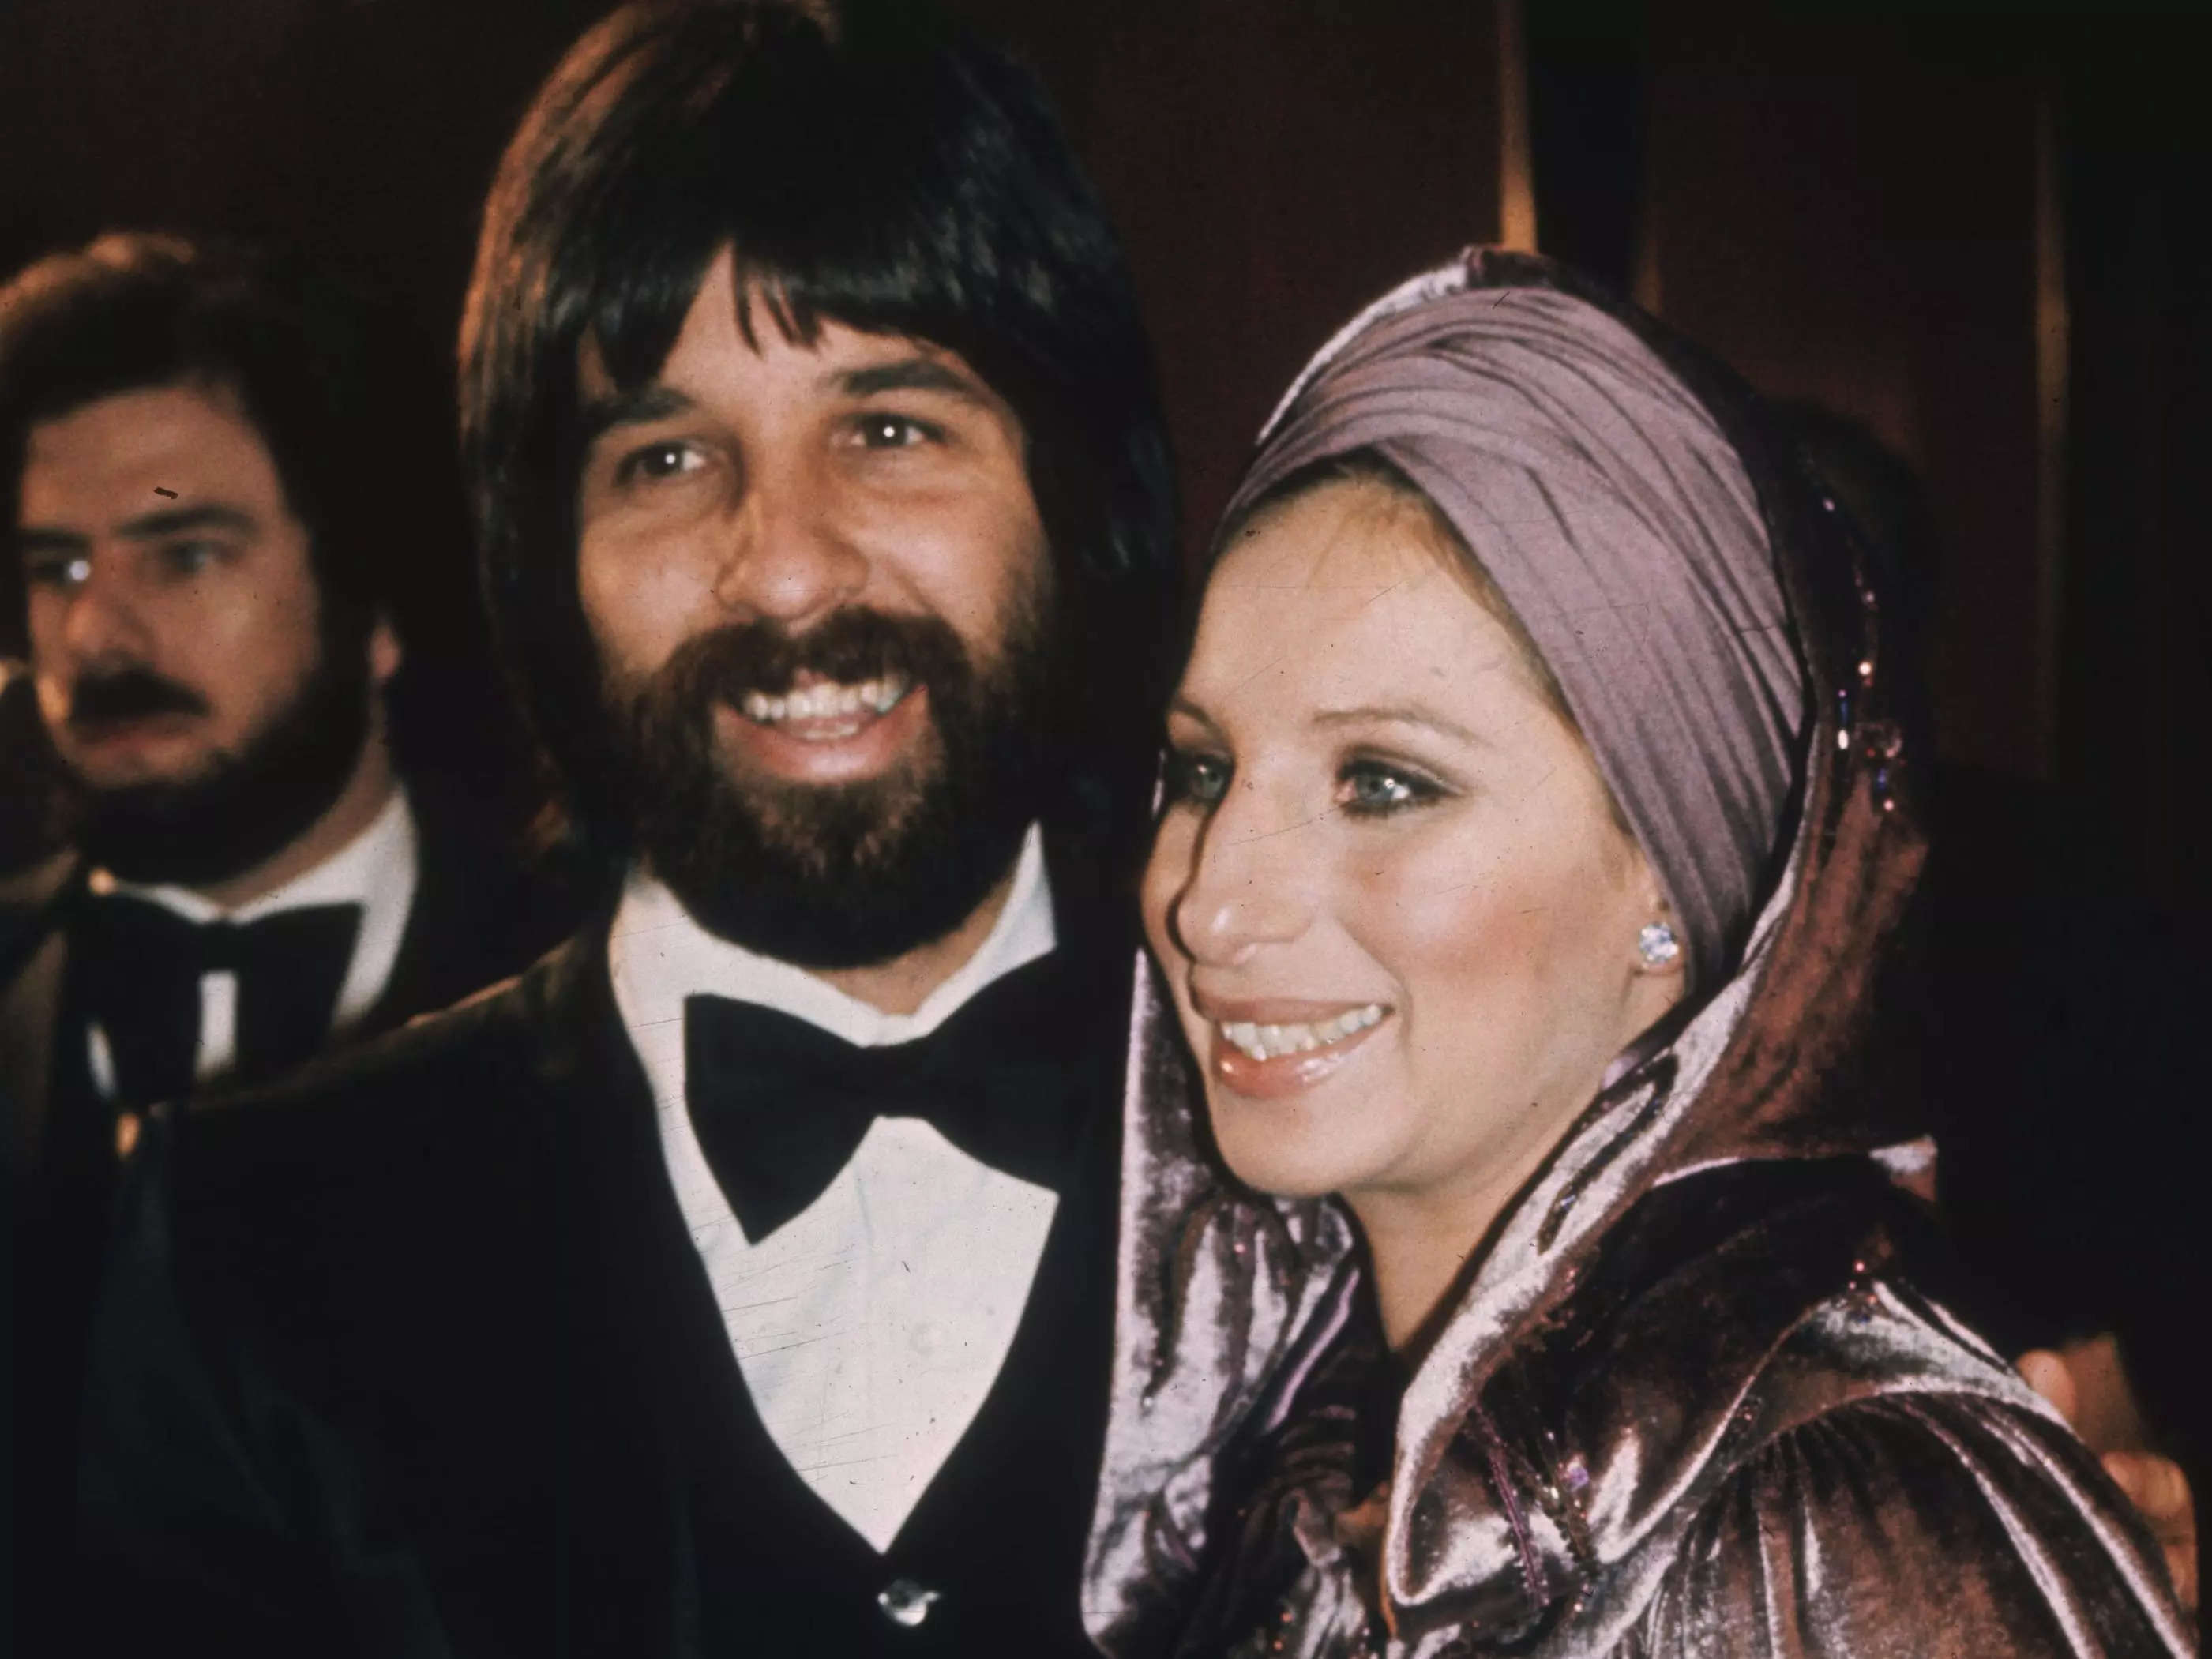 Who Is Married To Barbra Streisand